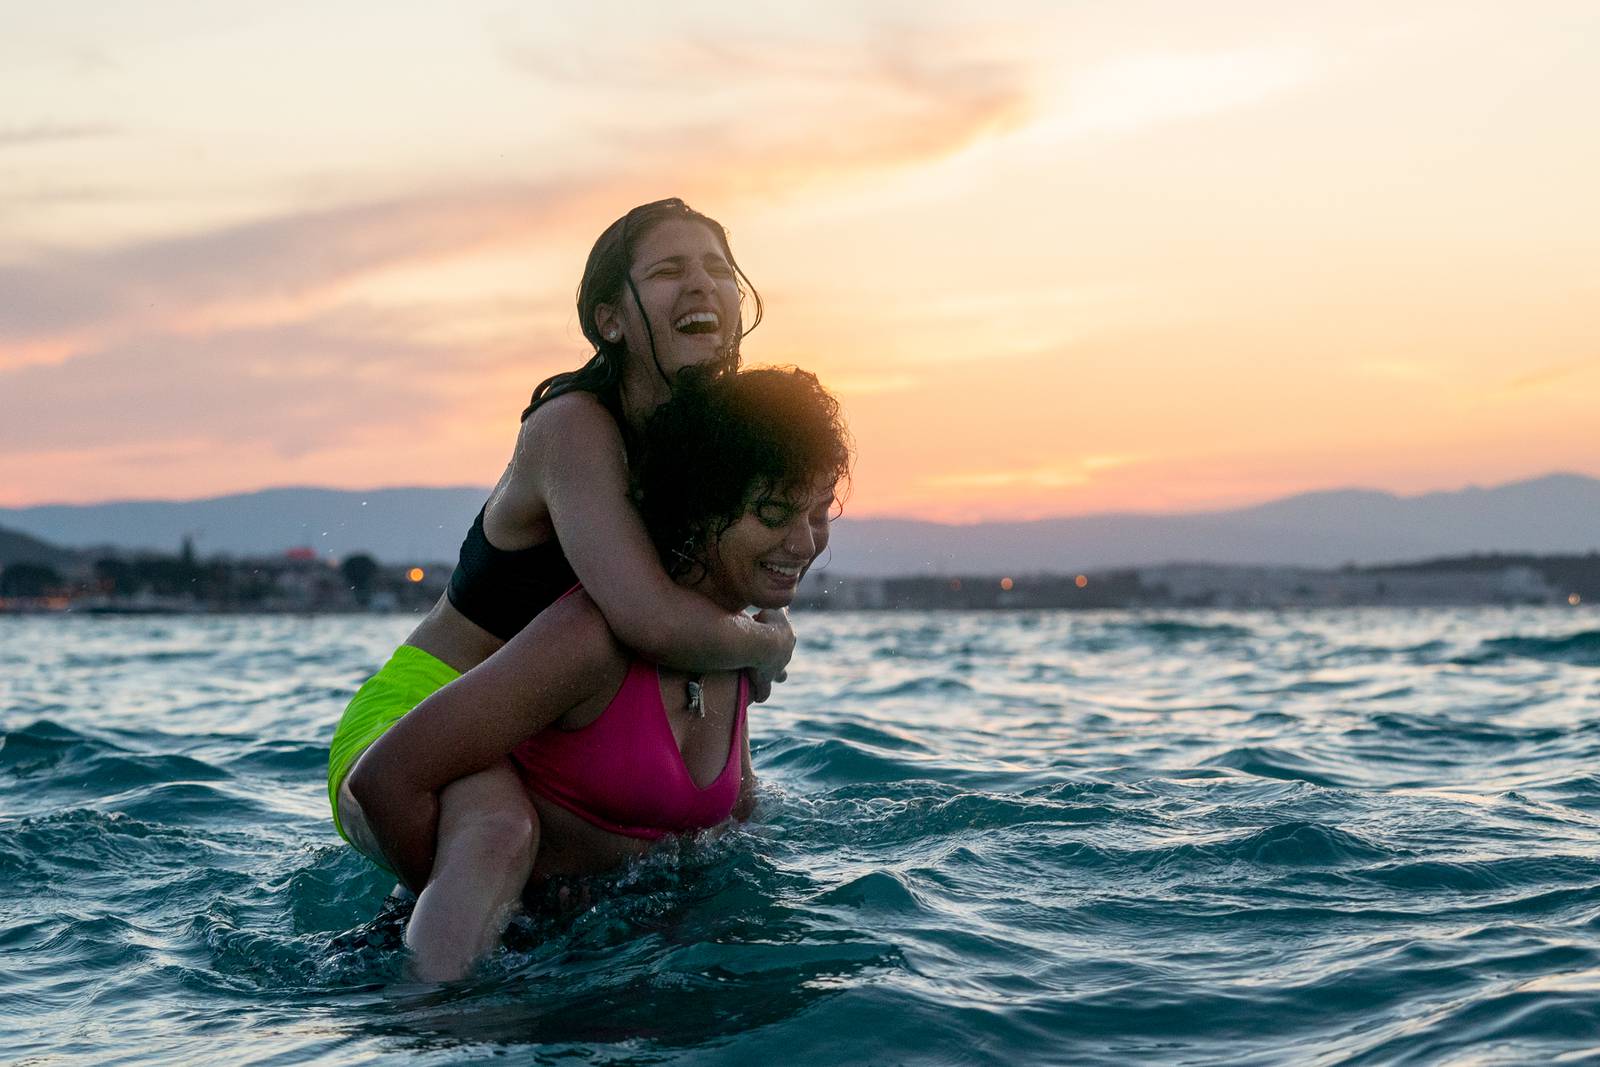 The Swimmers Film On Syrian Sisters Who Saved Refugees At Sea To Open Zurich Festival